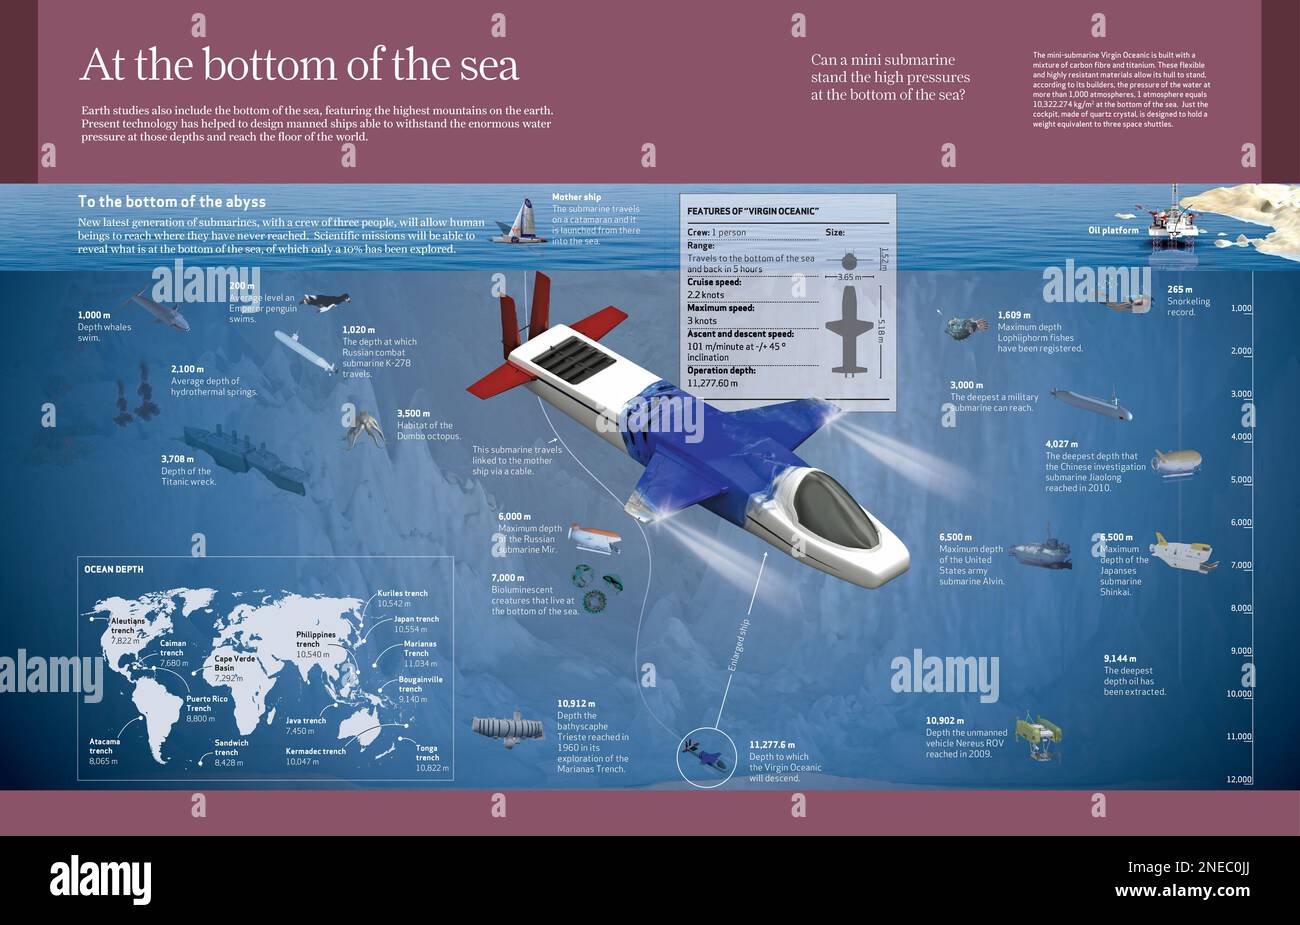 Computer graphics about the new manned ships to dive deeper into the ocean. [Adobe InDesign (.indd); 4960x3188]. Stock Photo